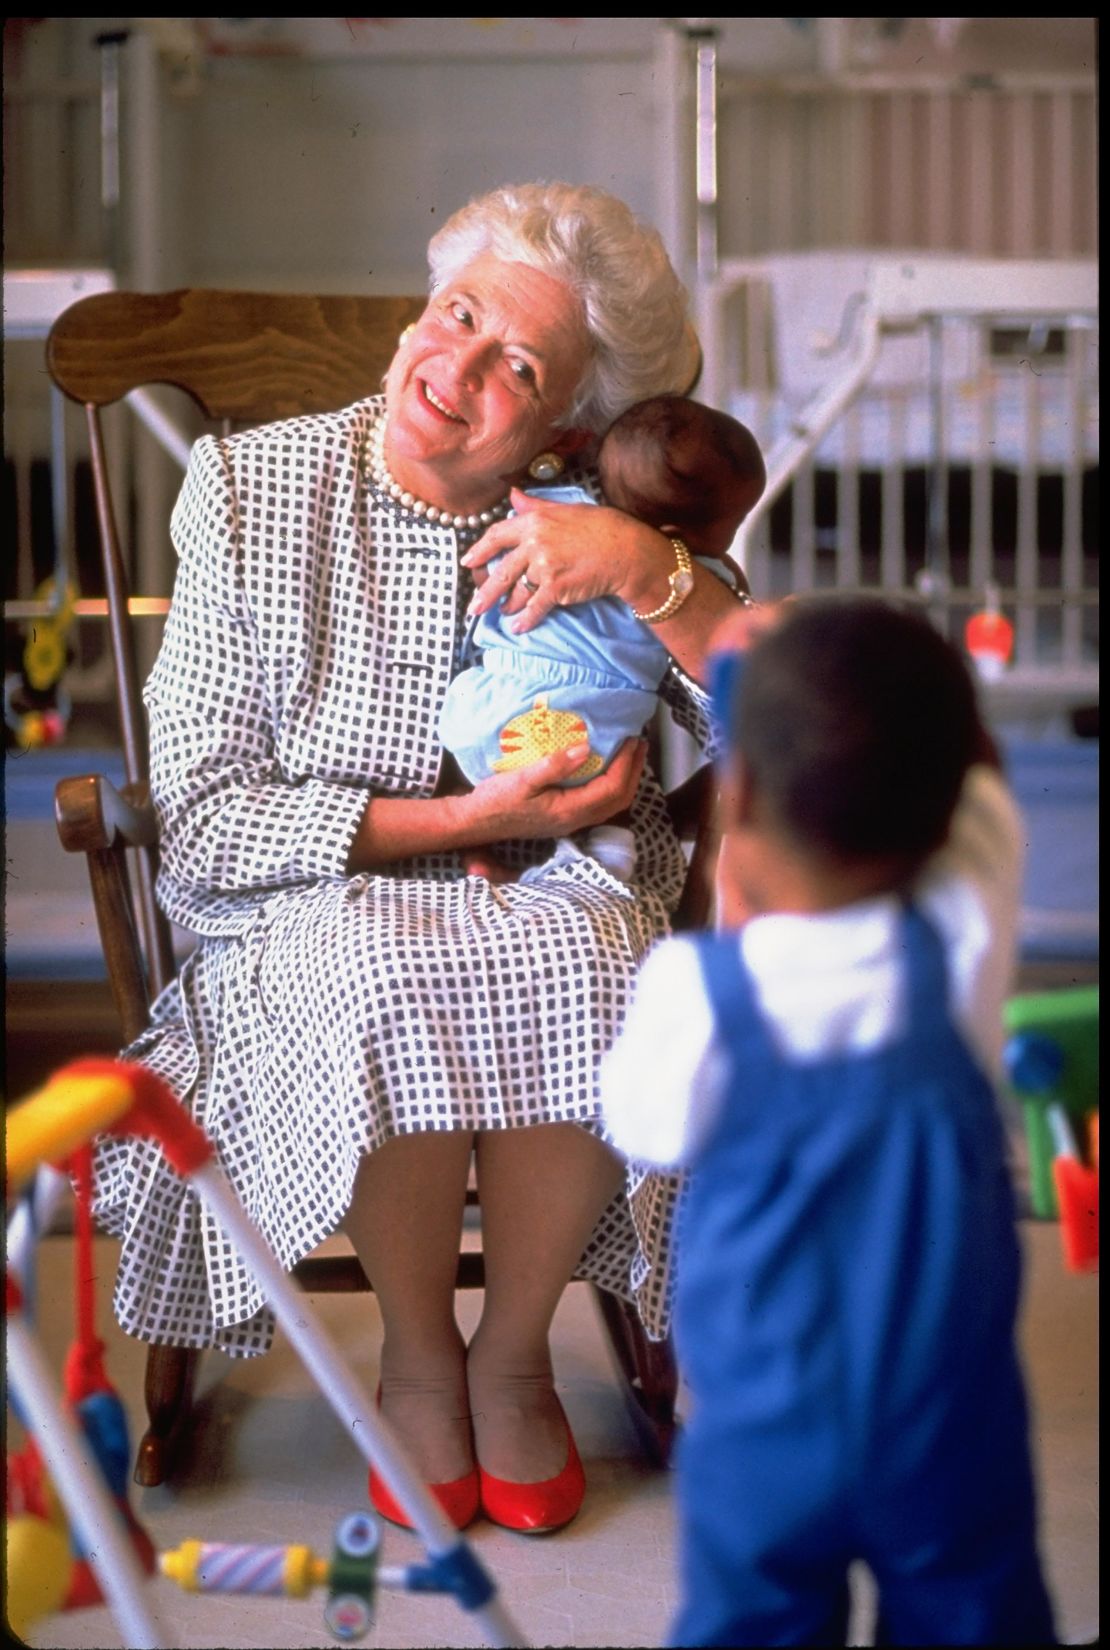 First Lady Barbara Bush holding baby while two-year-old child takes a photo wtih a toy camera at hospice for children with  AIDS. 